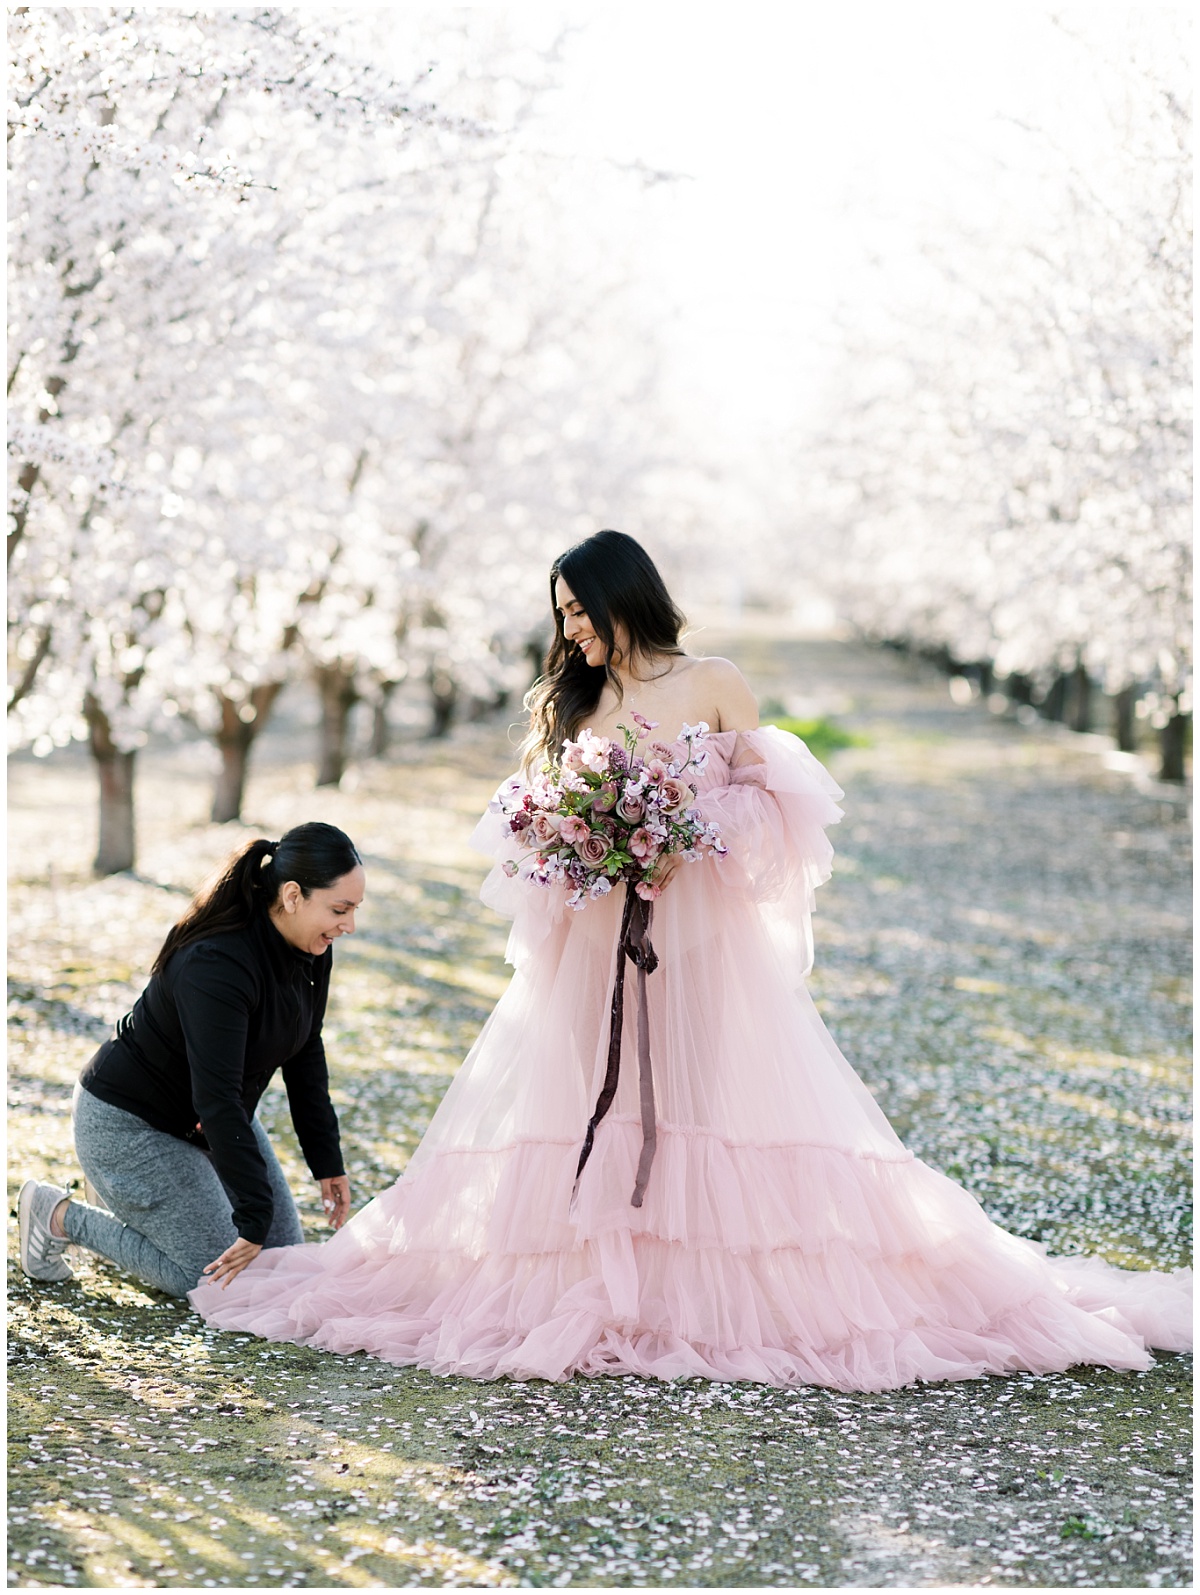 Ethereal Almond Orchard Session